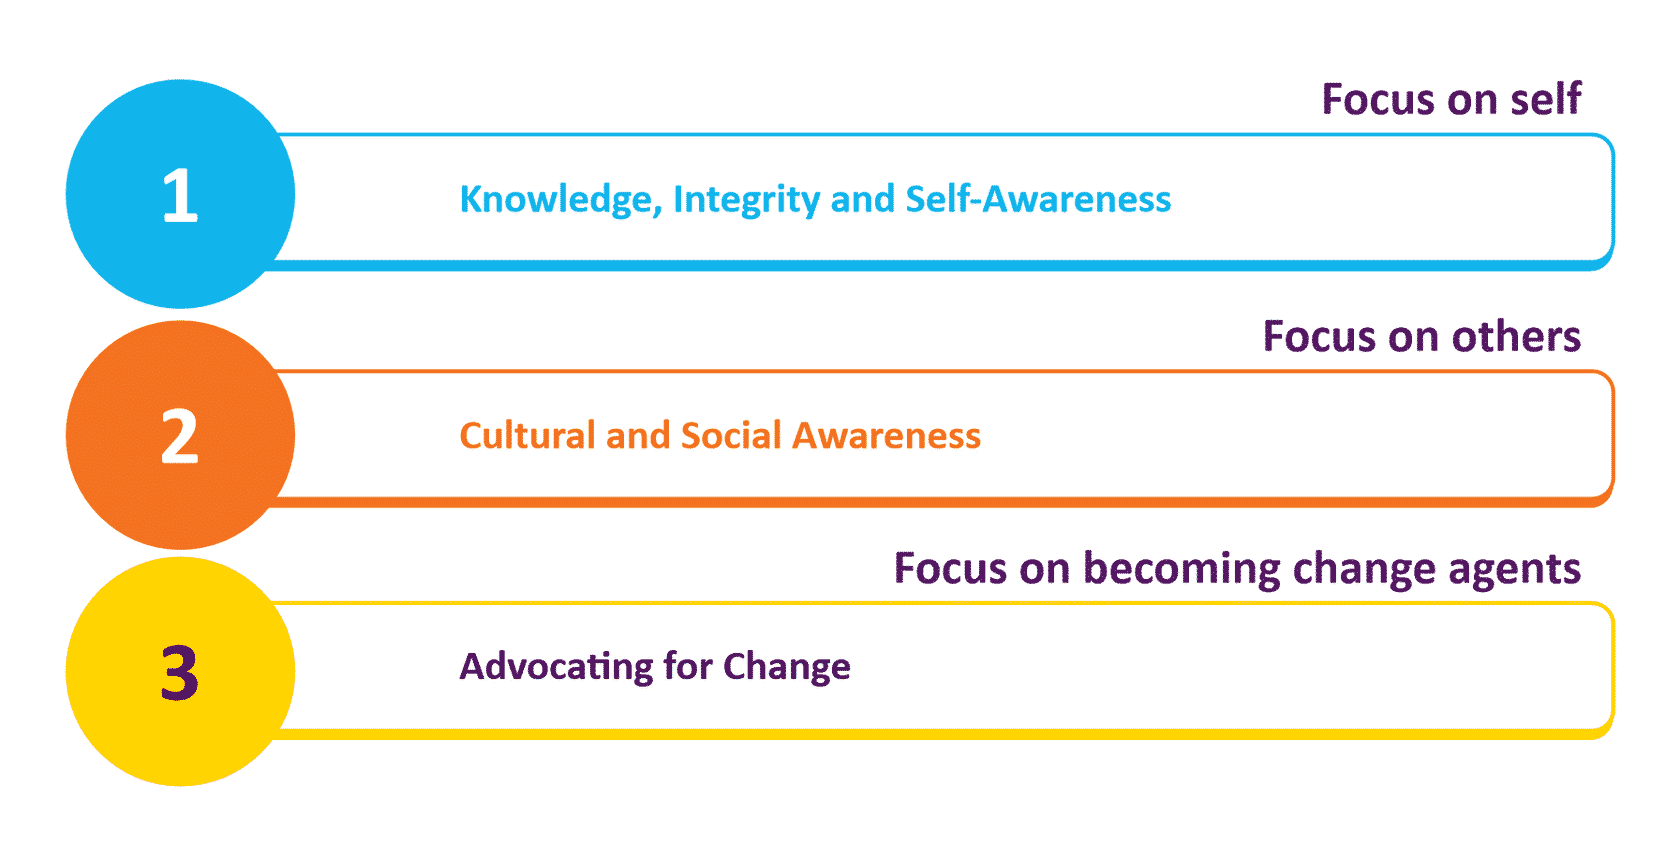 Champions for change 3 components - focus on self, focus on others, advocating for change